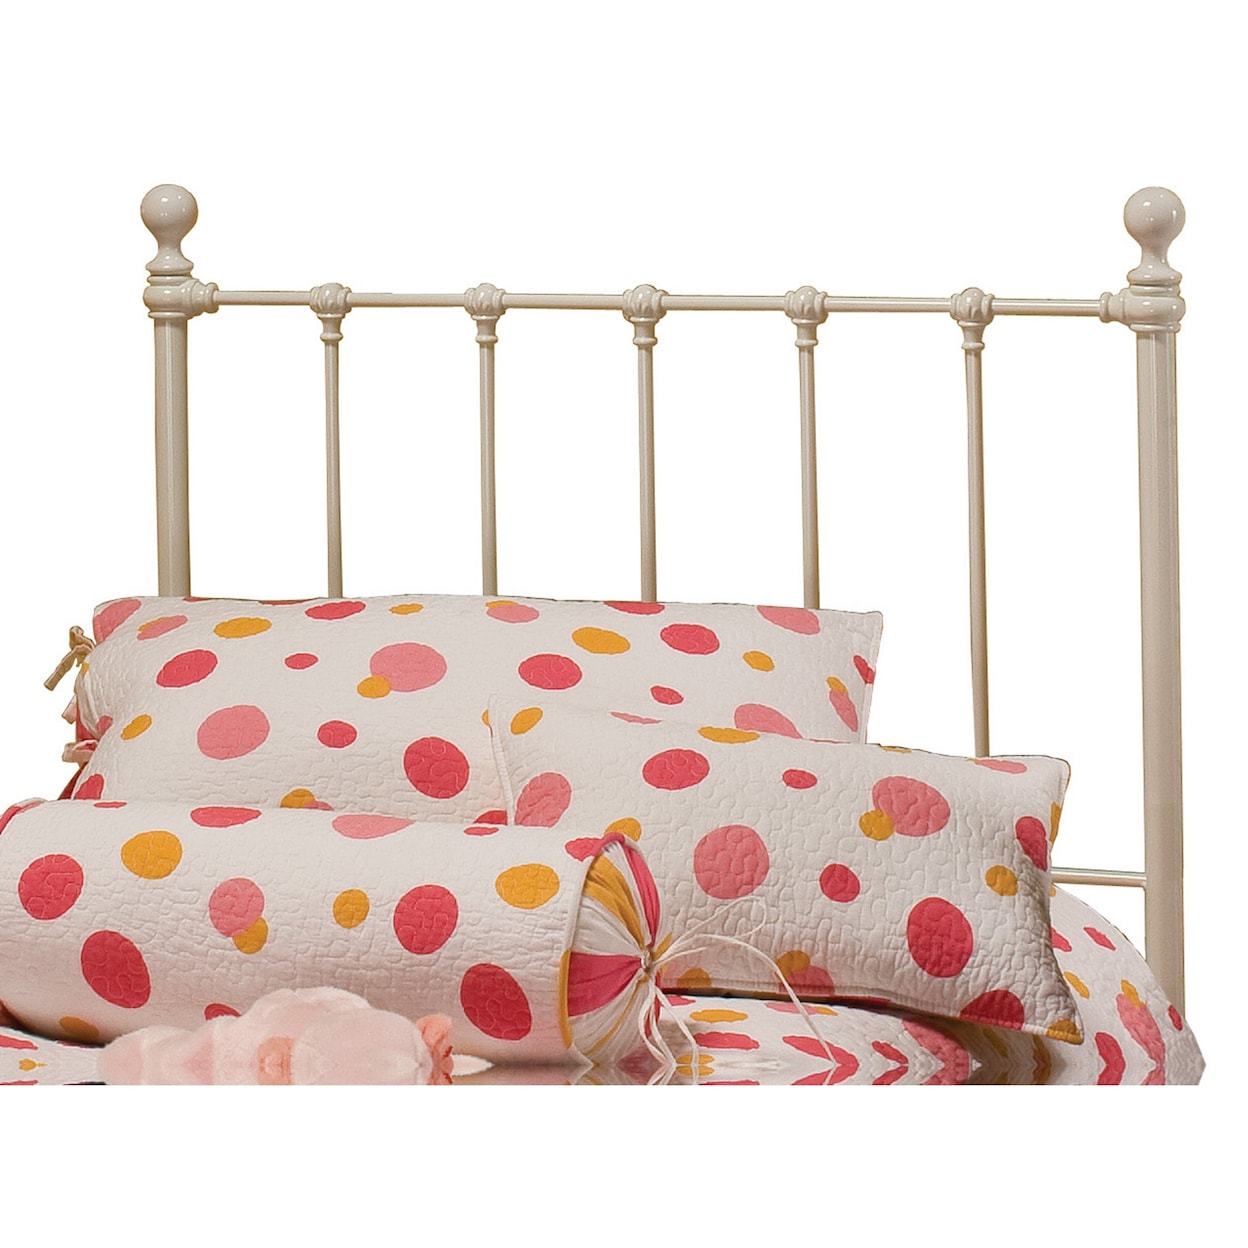 Hillsdale Metal Beds Queen Molly Headboard with Frame